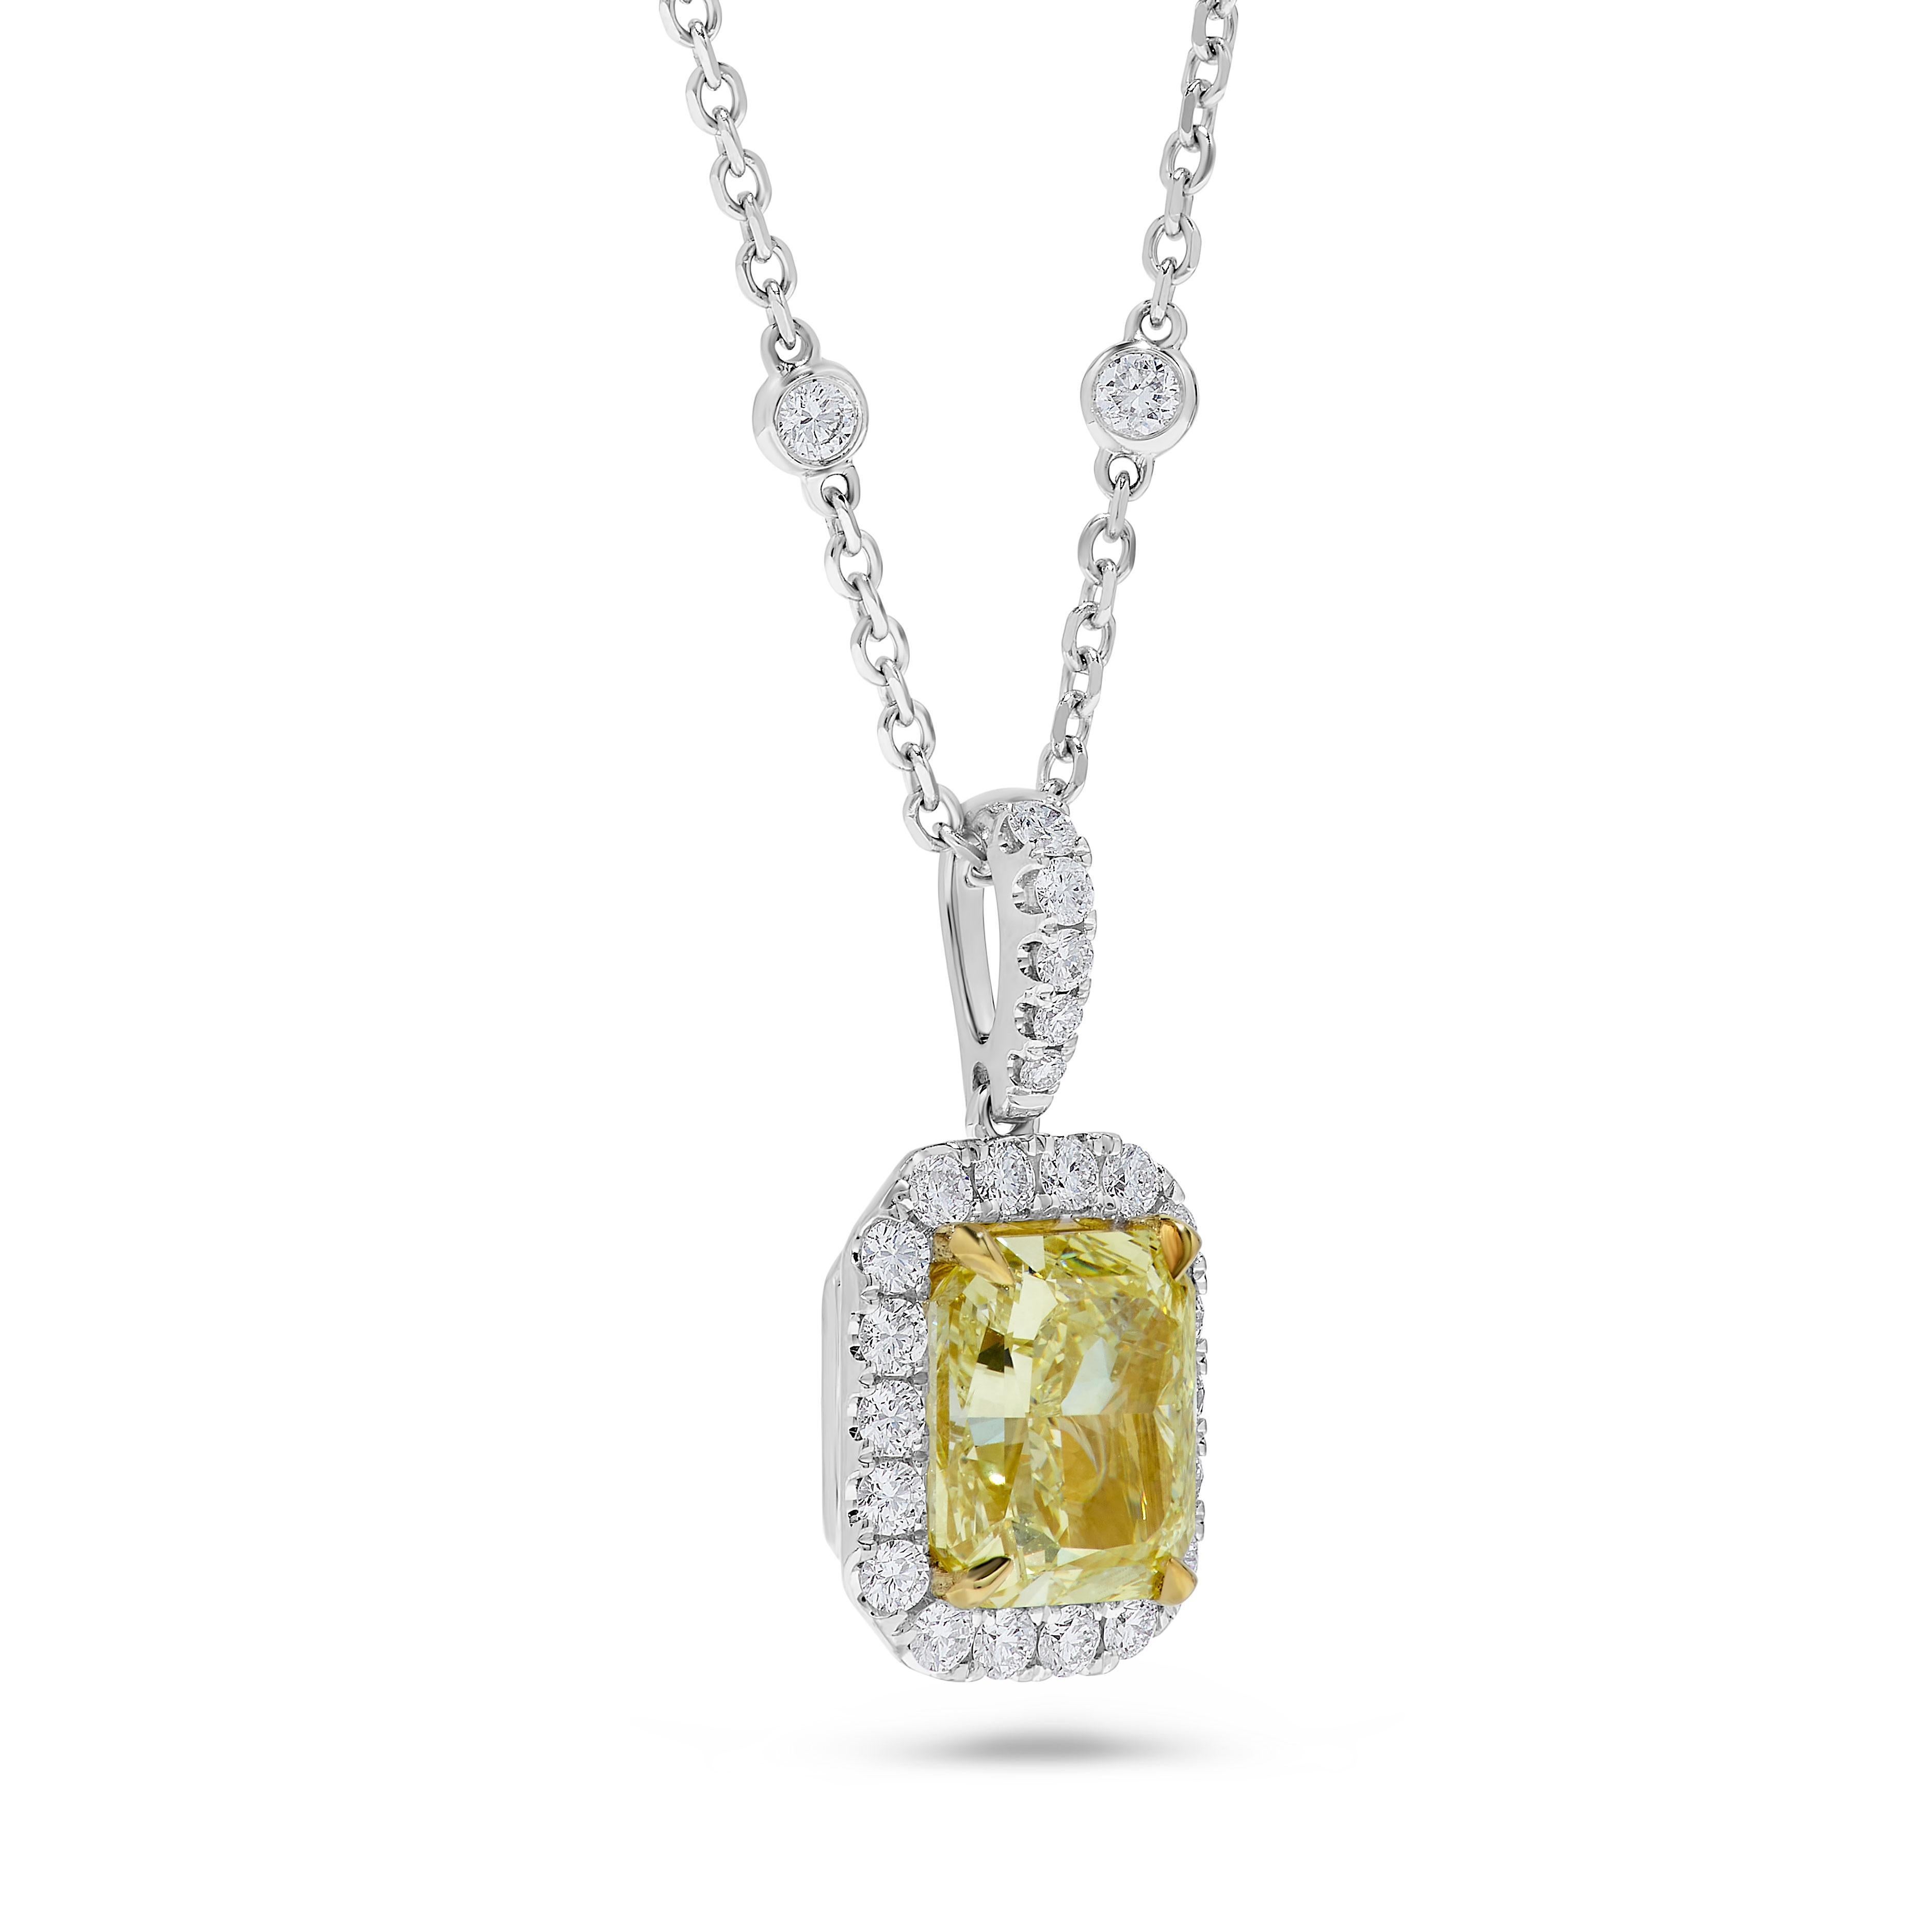 RareGemWorld's classic GIA certified diamond pendant. Mounted in a beautiful 18K Yellow and White Gold setting with a natural radiant cut yellow diamond. The yellow diamond is surrounded by round natural white diamond melee. This pendant is